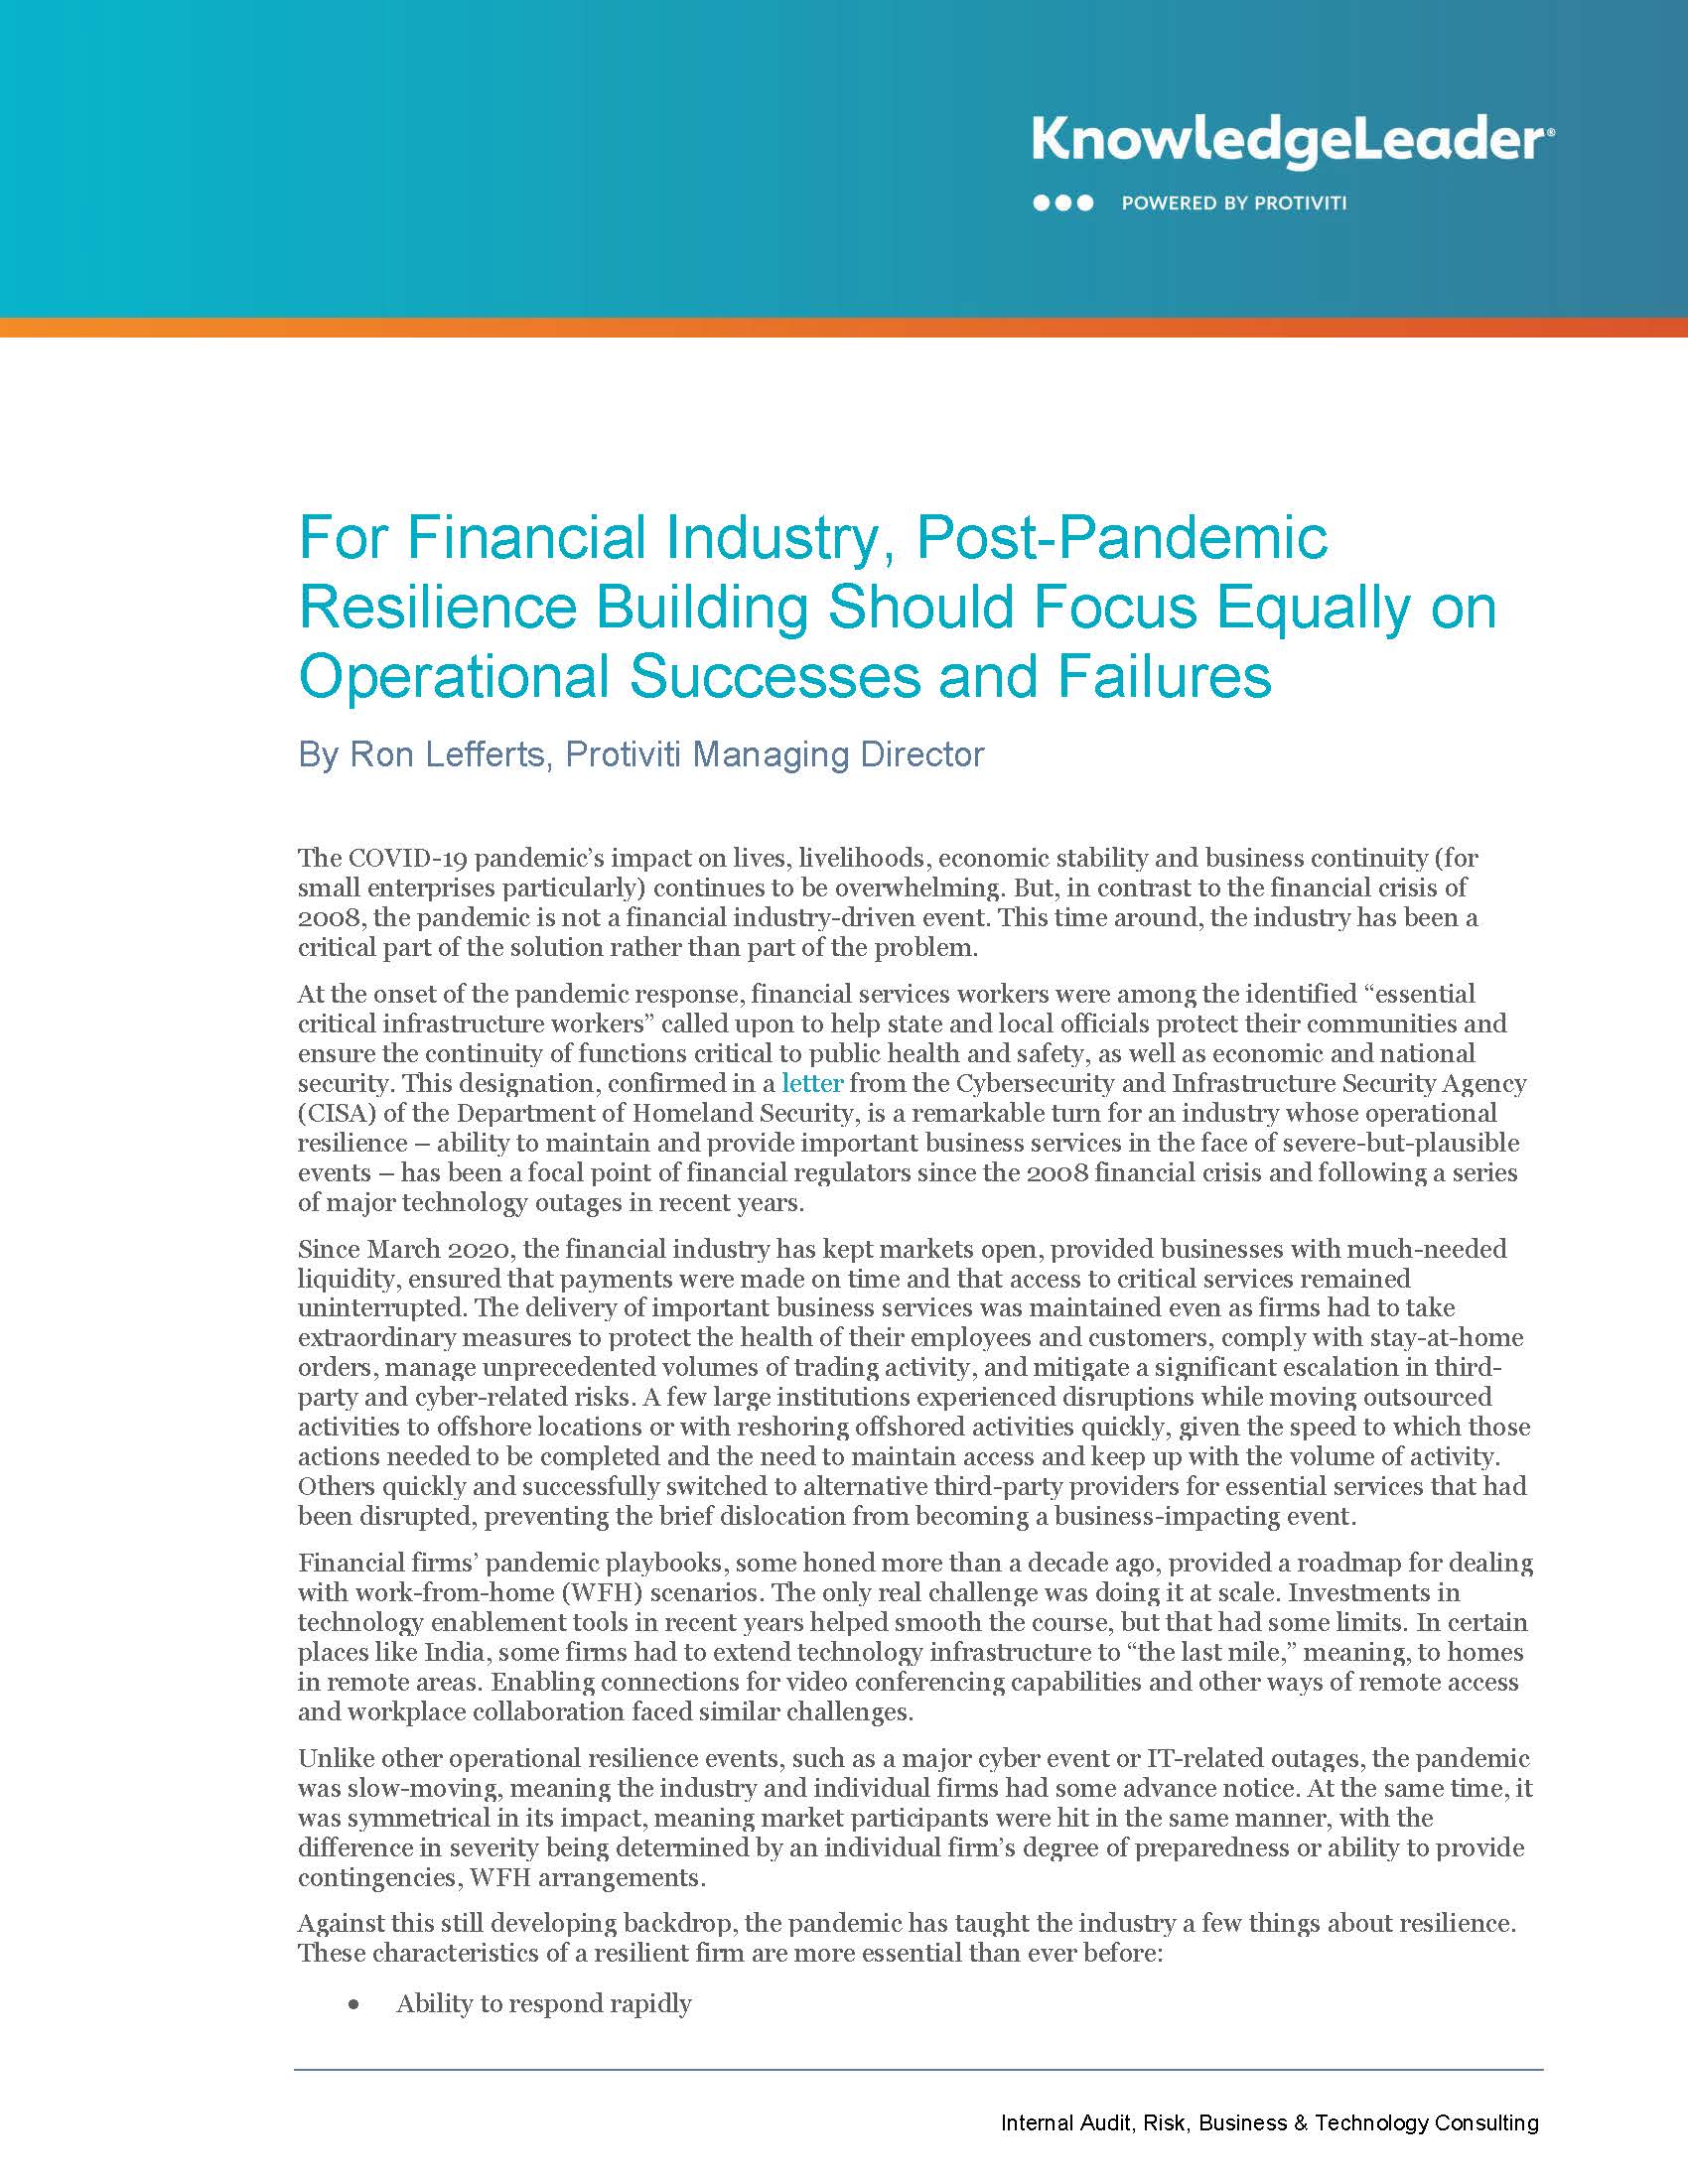 Screenshot of the first page of For Financial Industry, Post-Pandemic Resilience Building Should Focus Equally on Operational Successes and Failures